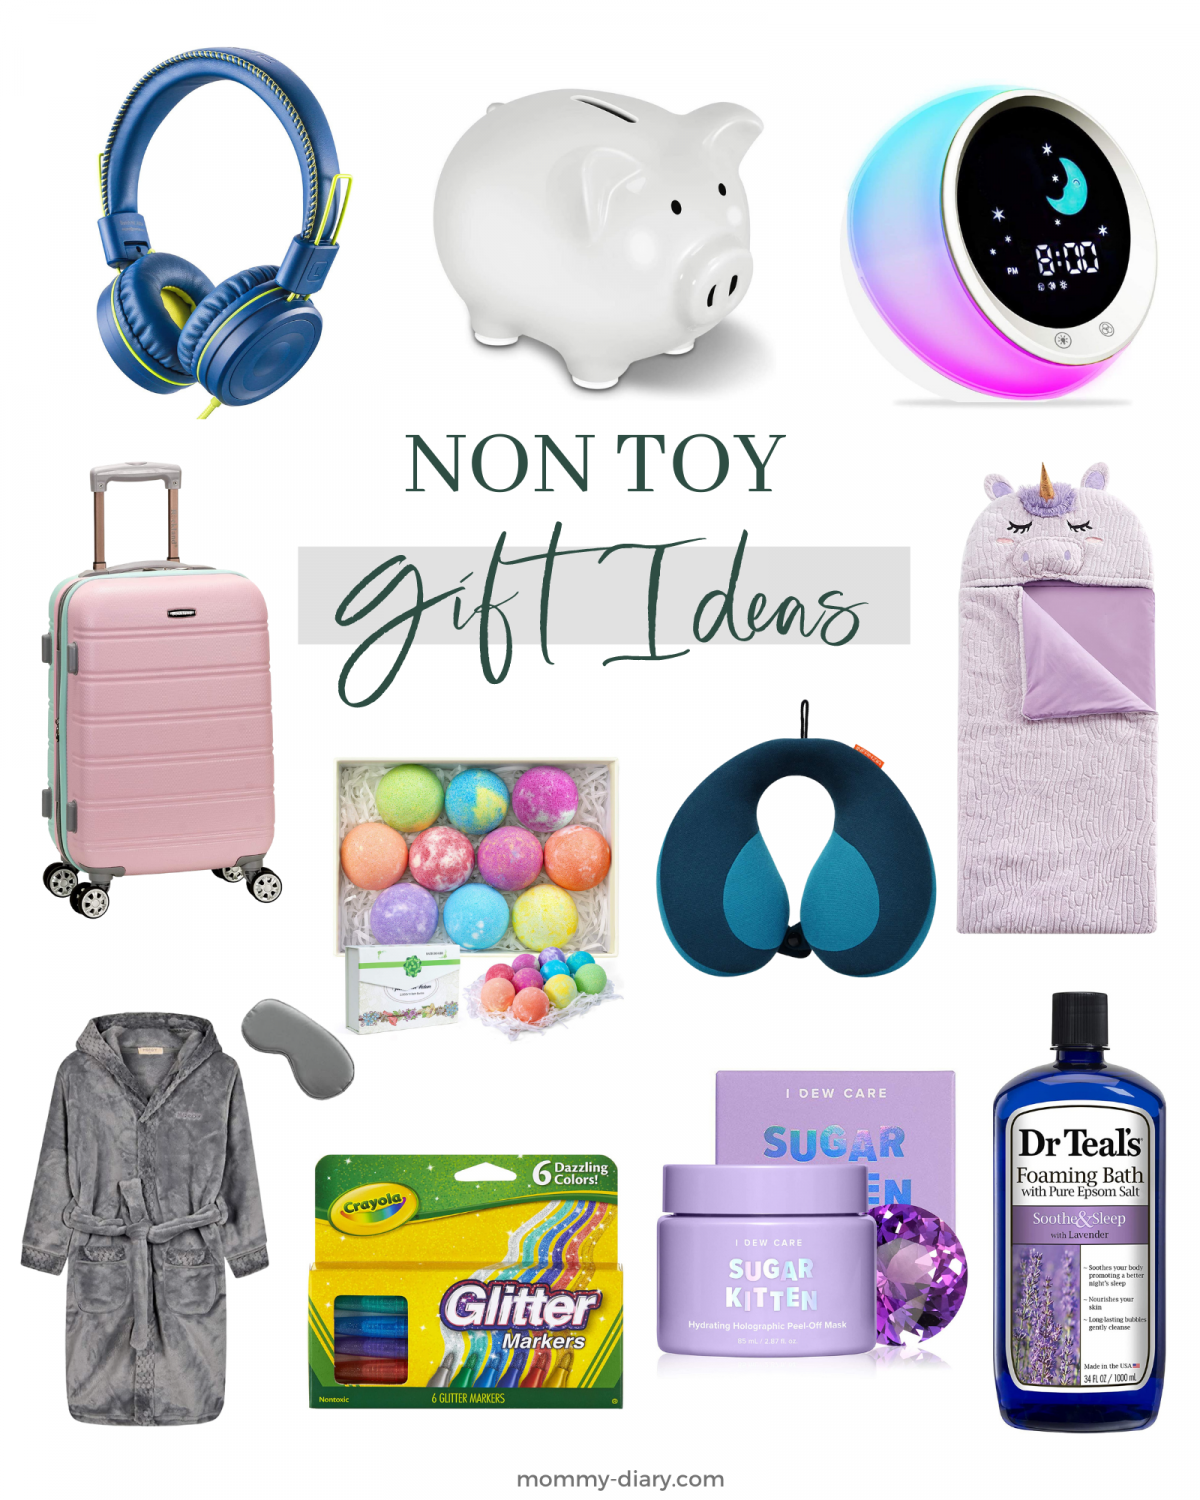 https://mommy-diary.com/wp-content/uploads/2020/12/Non-Toy-Gift-Ideas-1200x1500.png